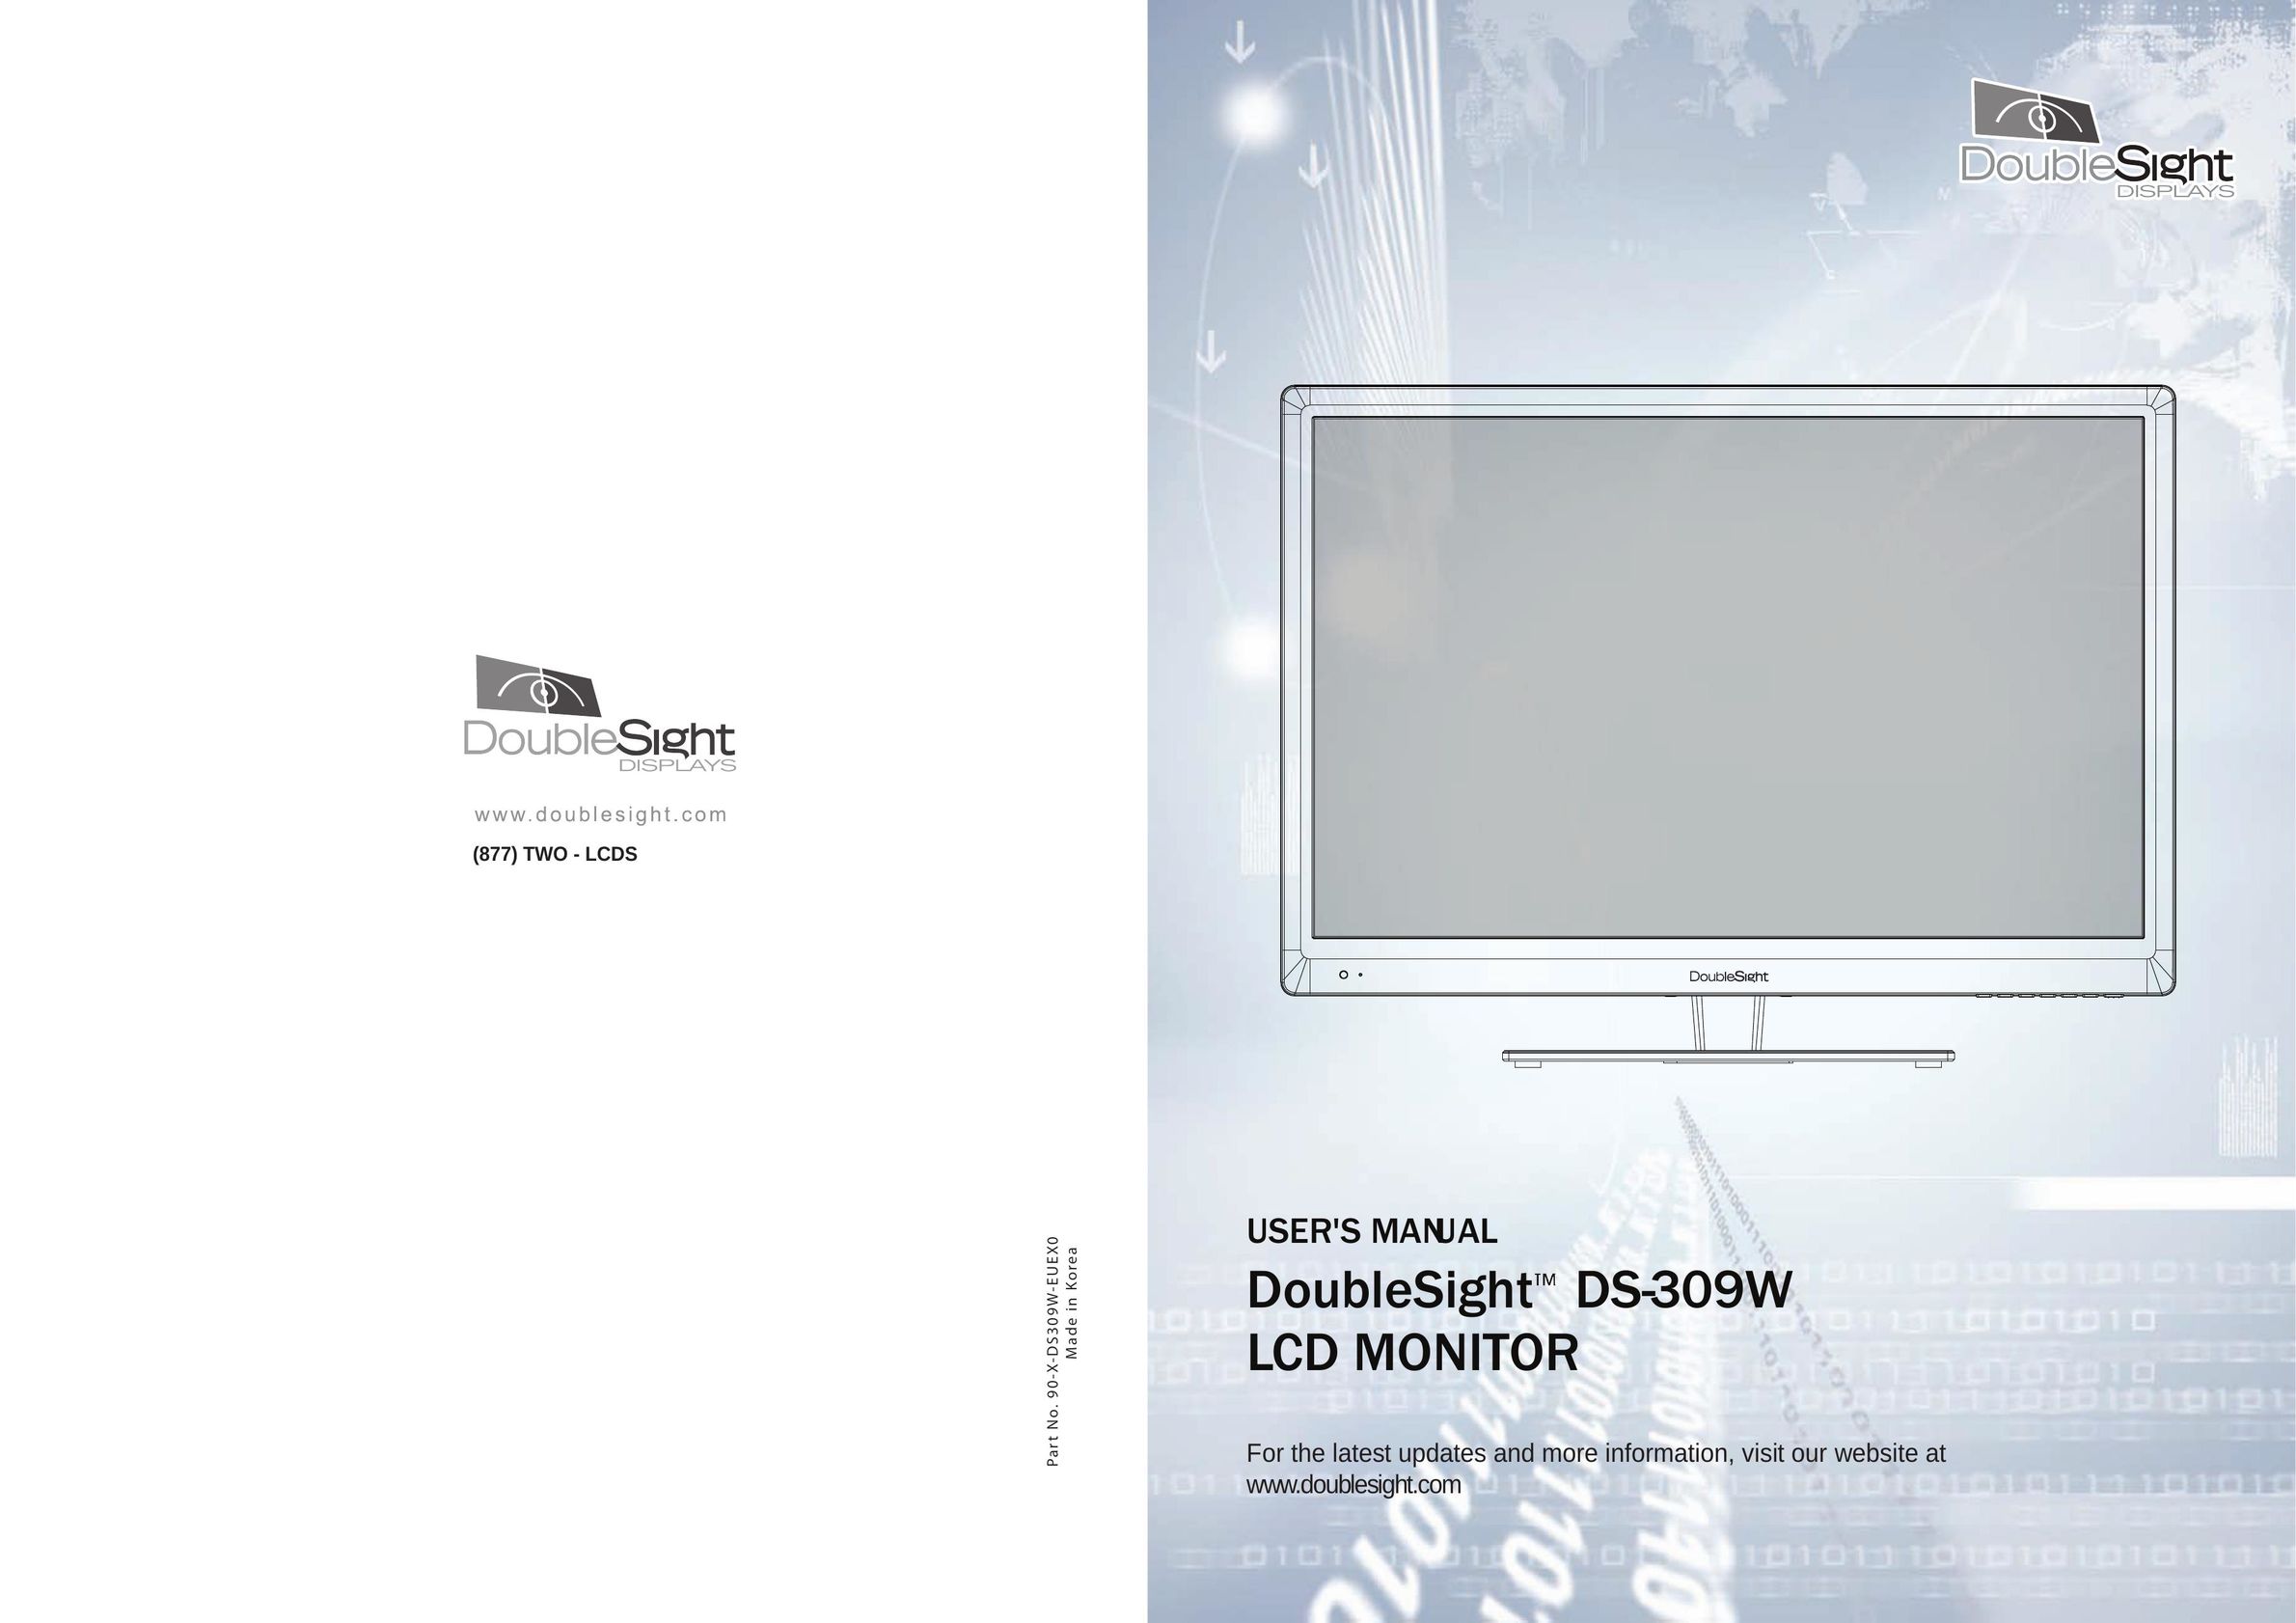 DoubleSight Displays DS-279W Computer Monitor User Manual